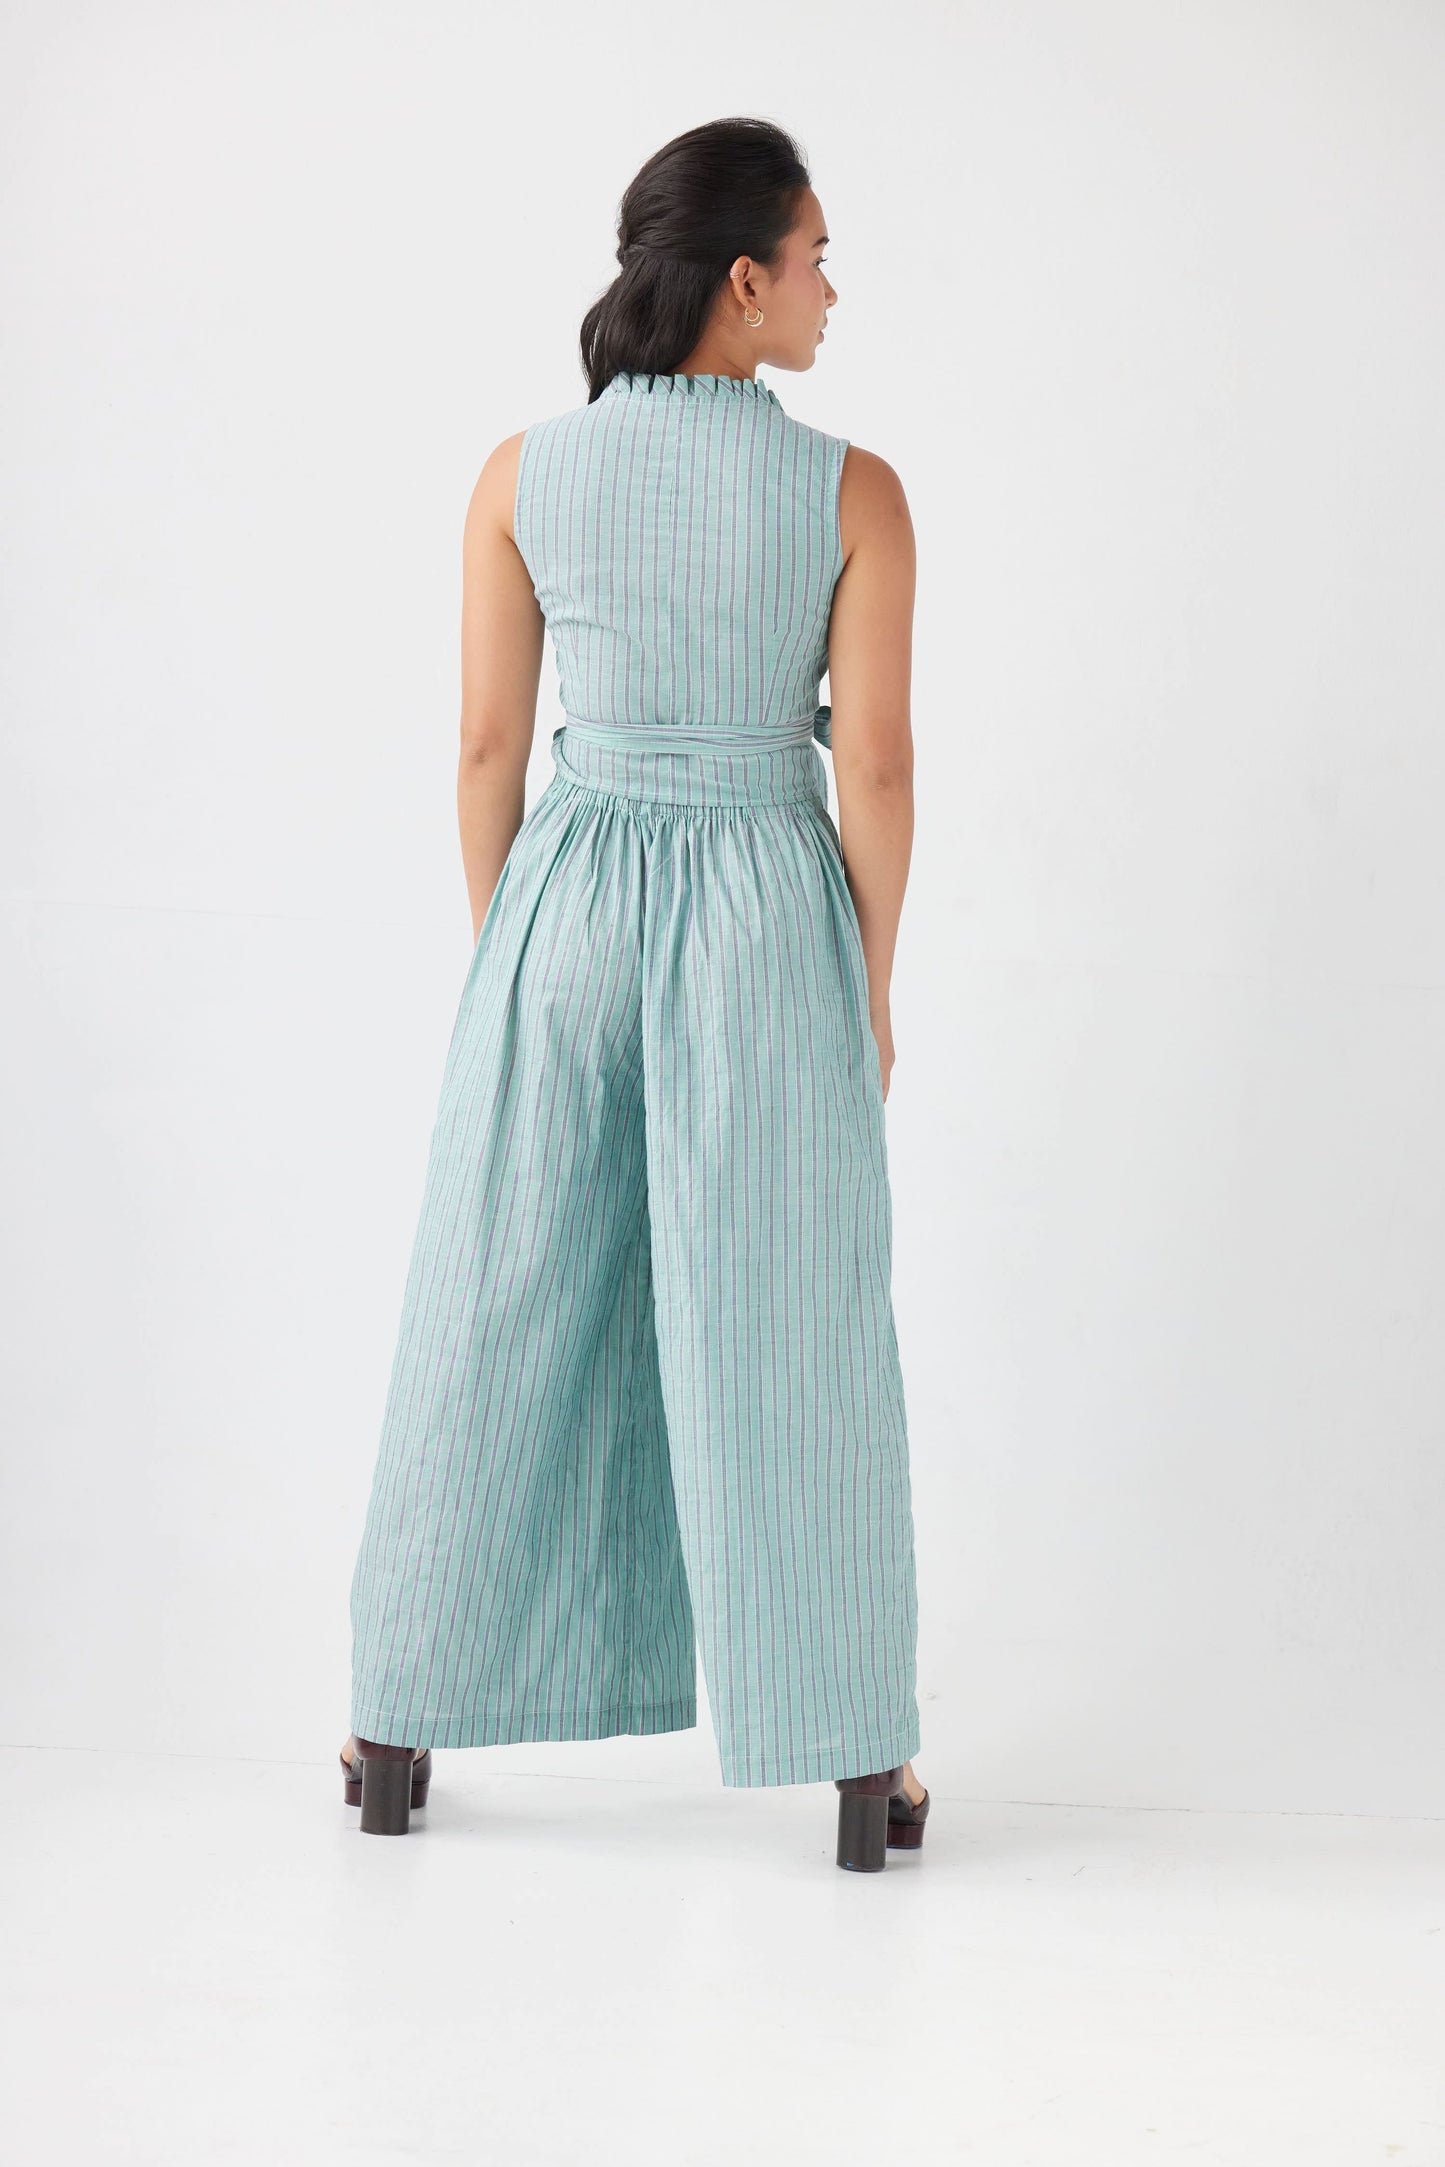 Gretchen Pant in Summer Cotton Pants CHRISTINE ALCALAY   